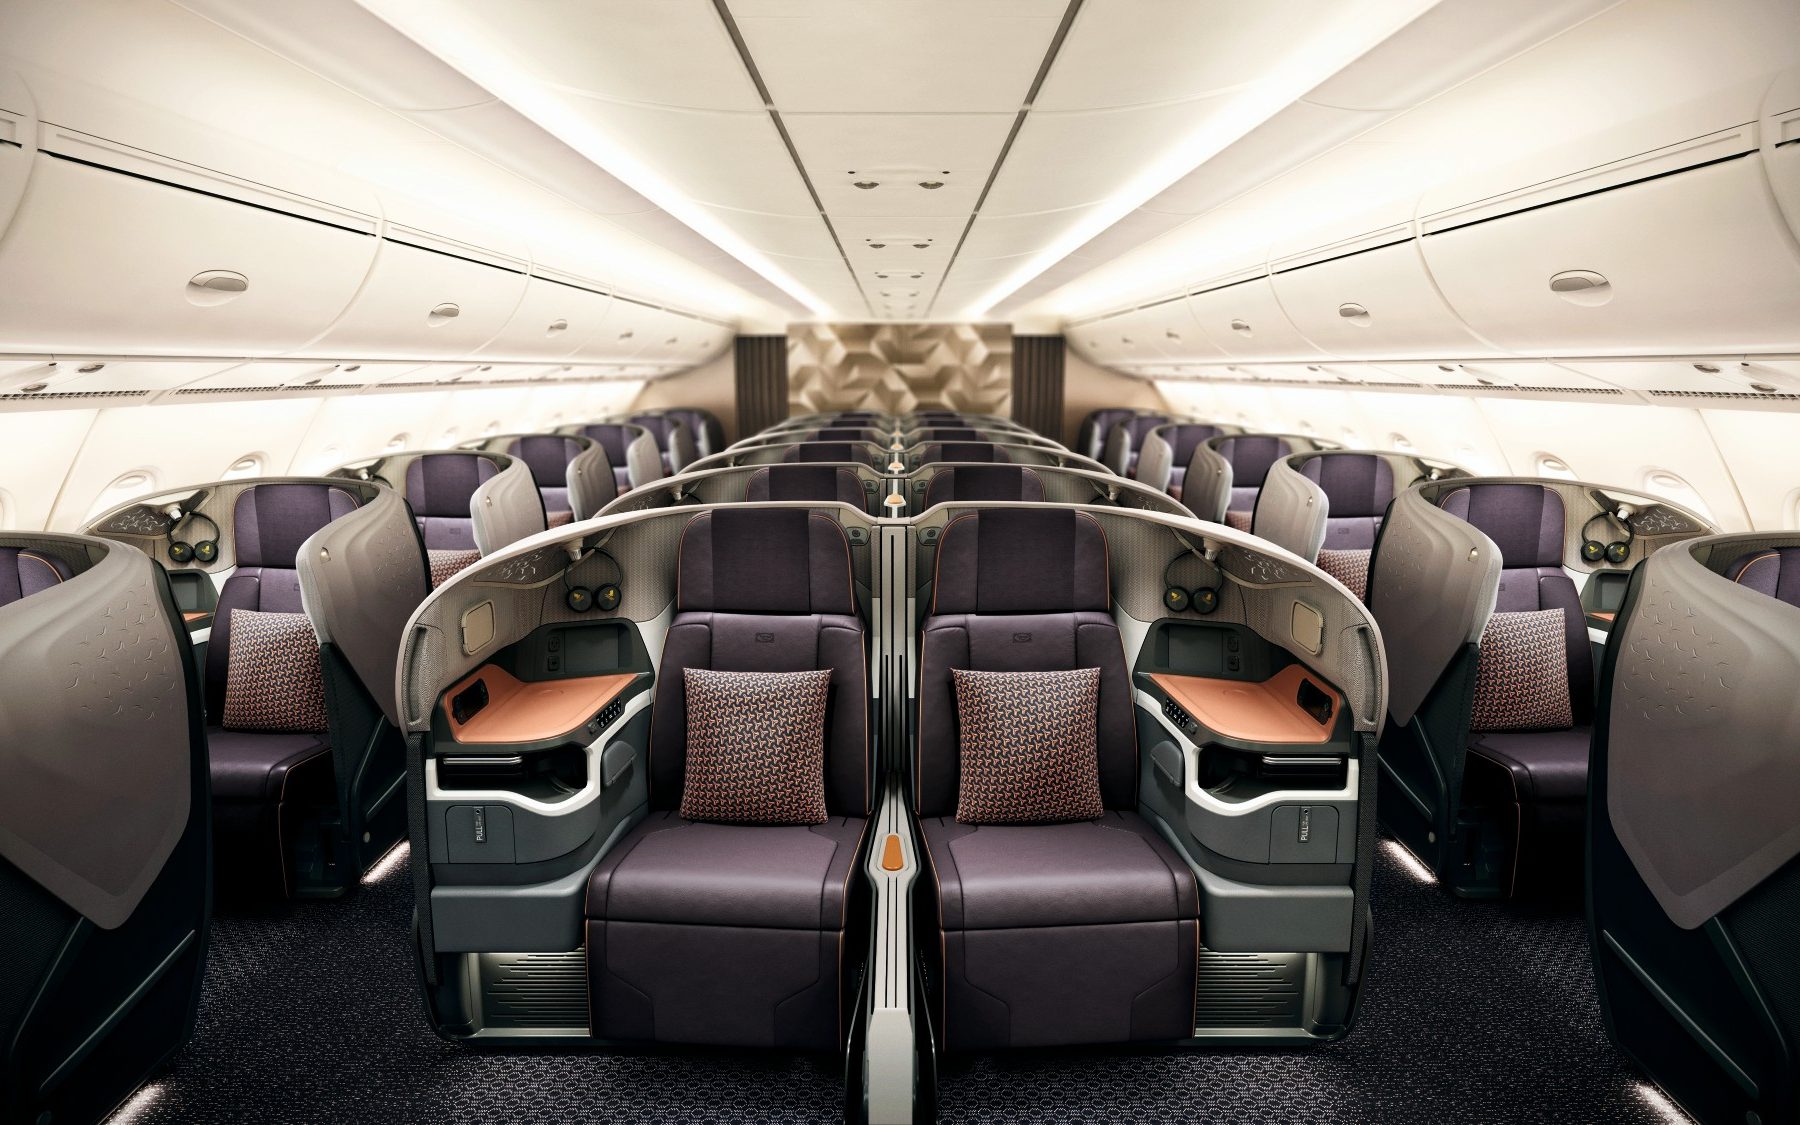 Singapore Airlines Business Class Cabin on board the new A380